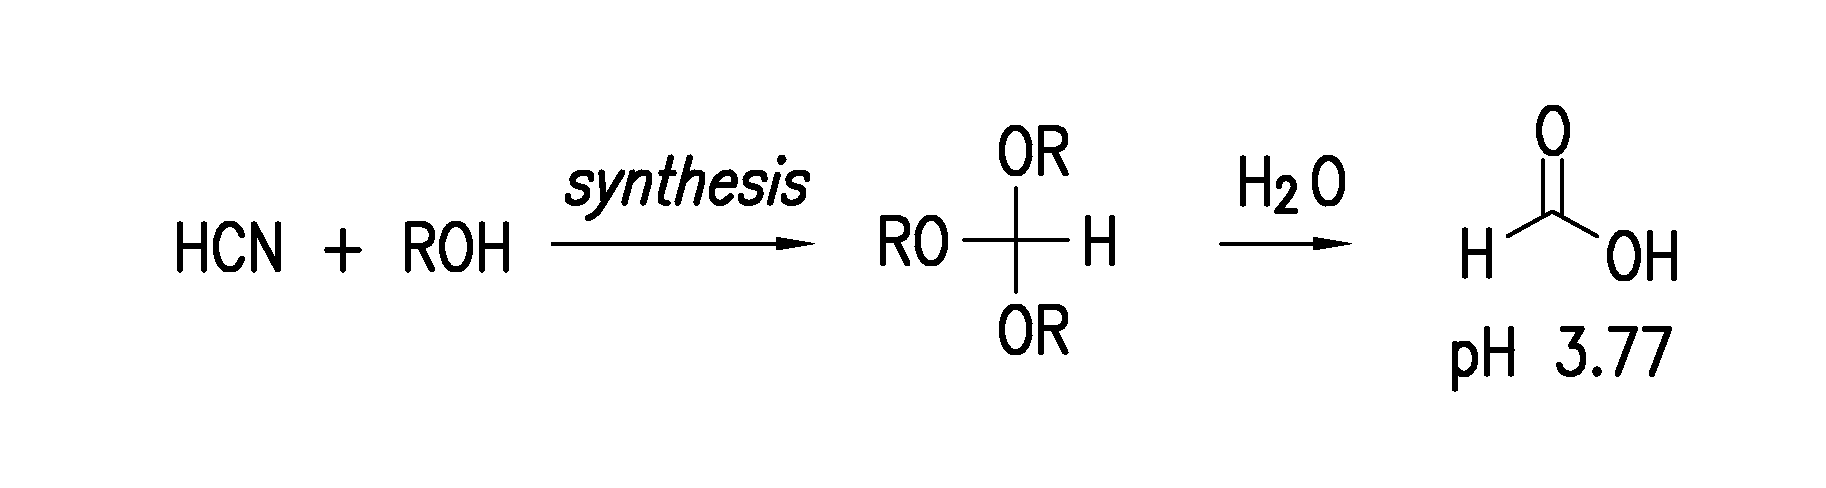 Electron-poor orthoester for generating acid in a well fluid